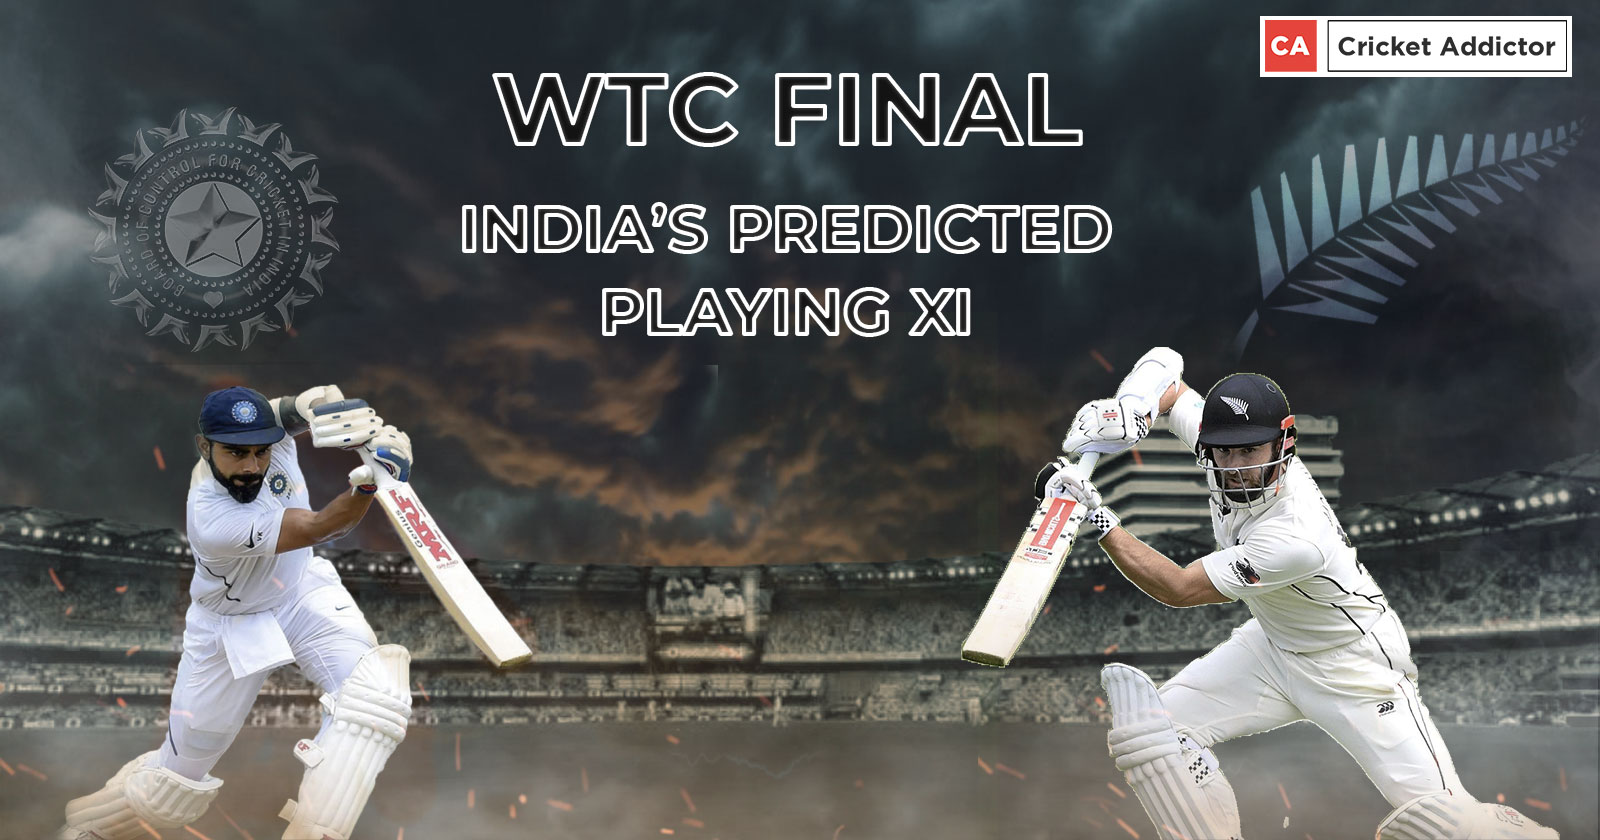 India vs New Zealand WTC Final- India's Predicted Playing XI